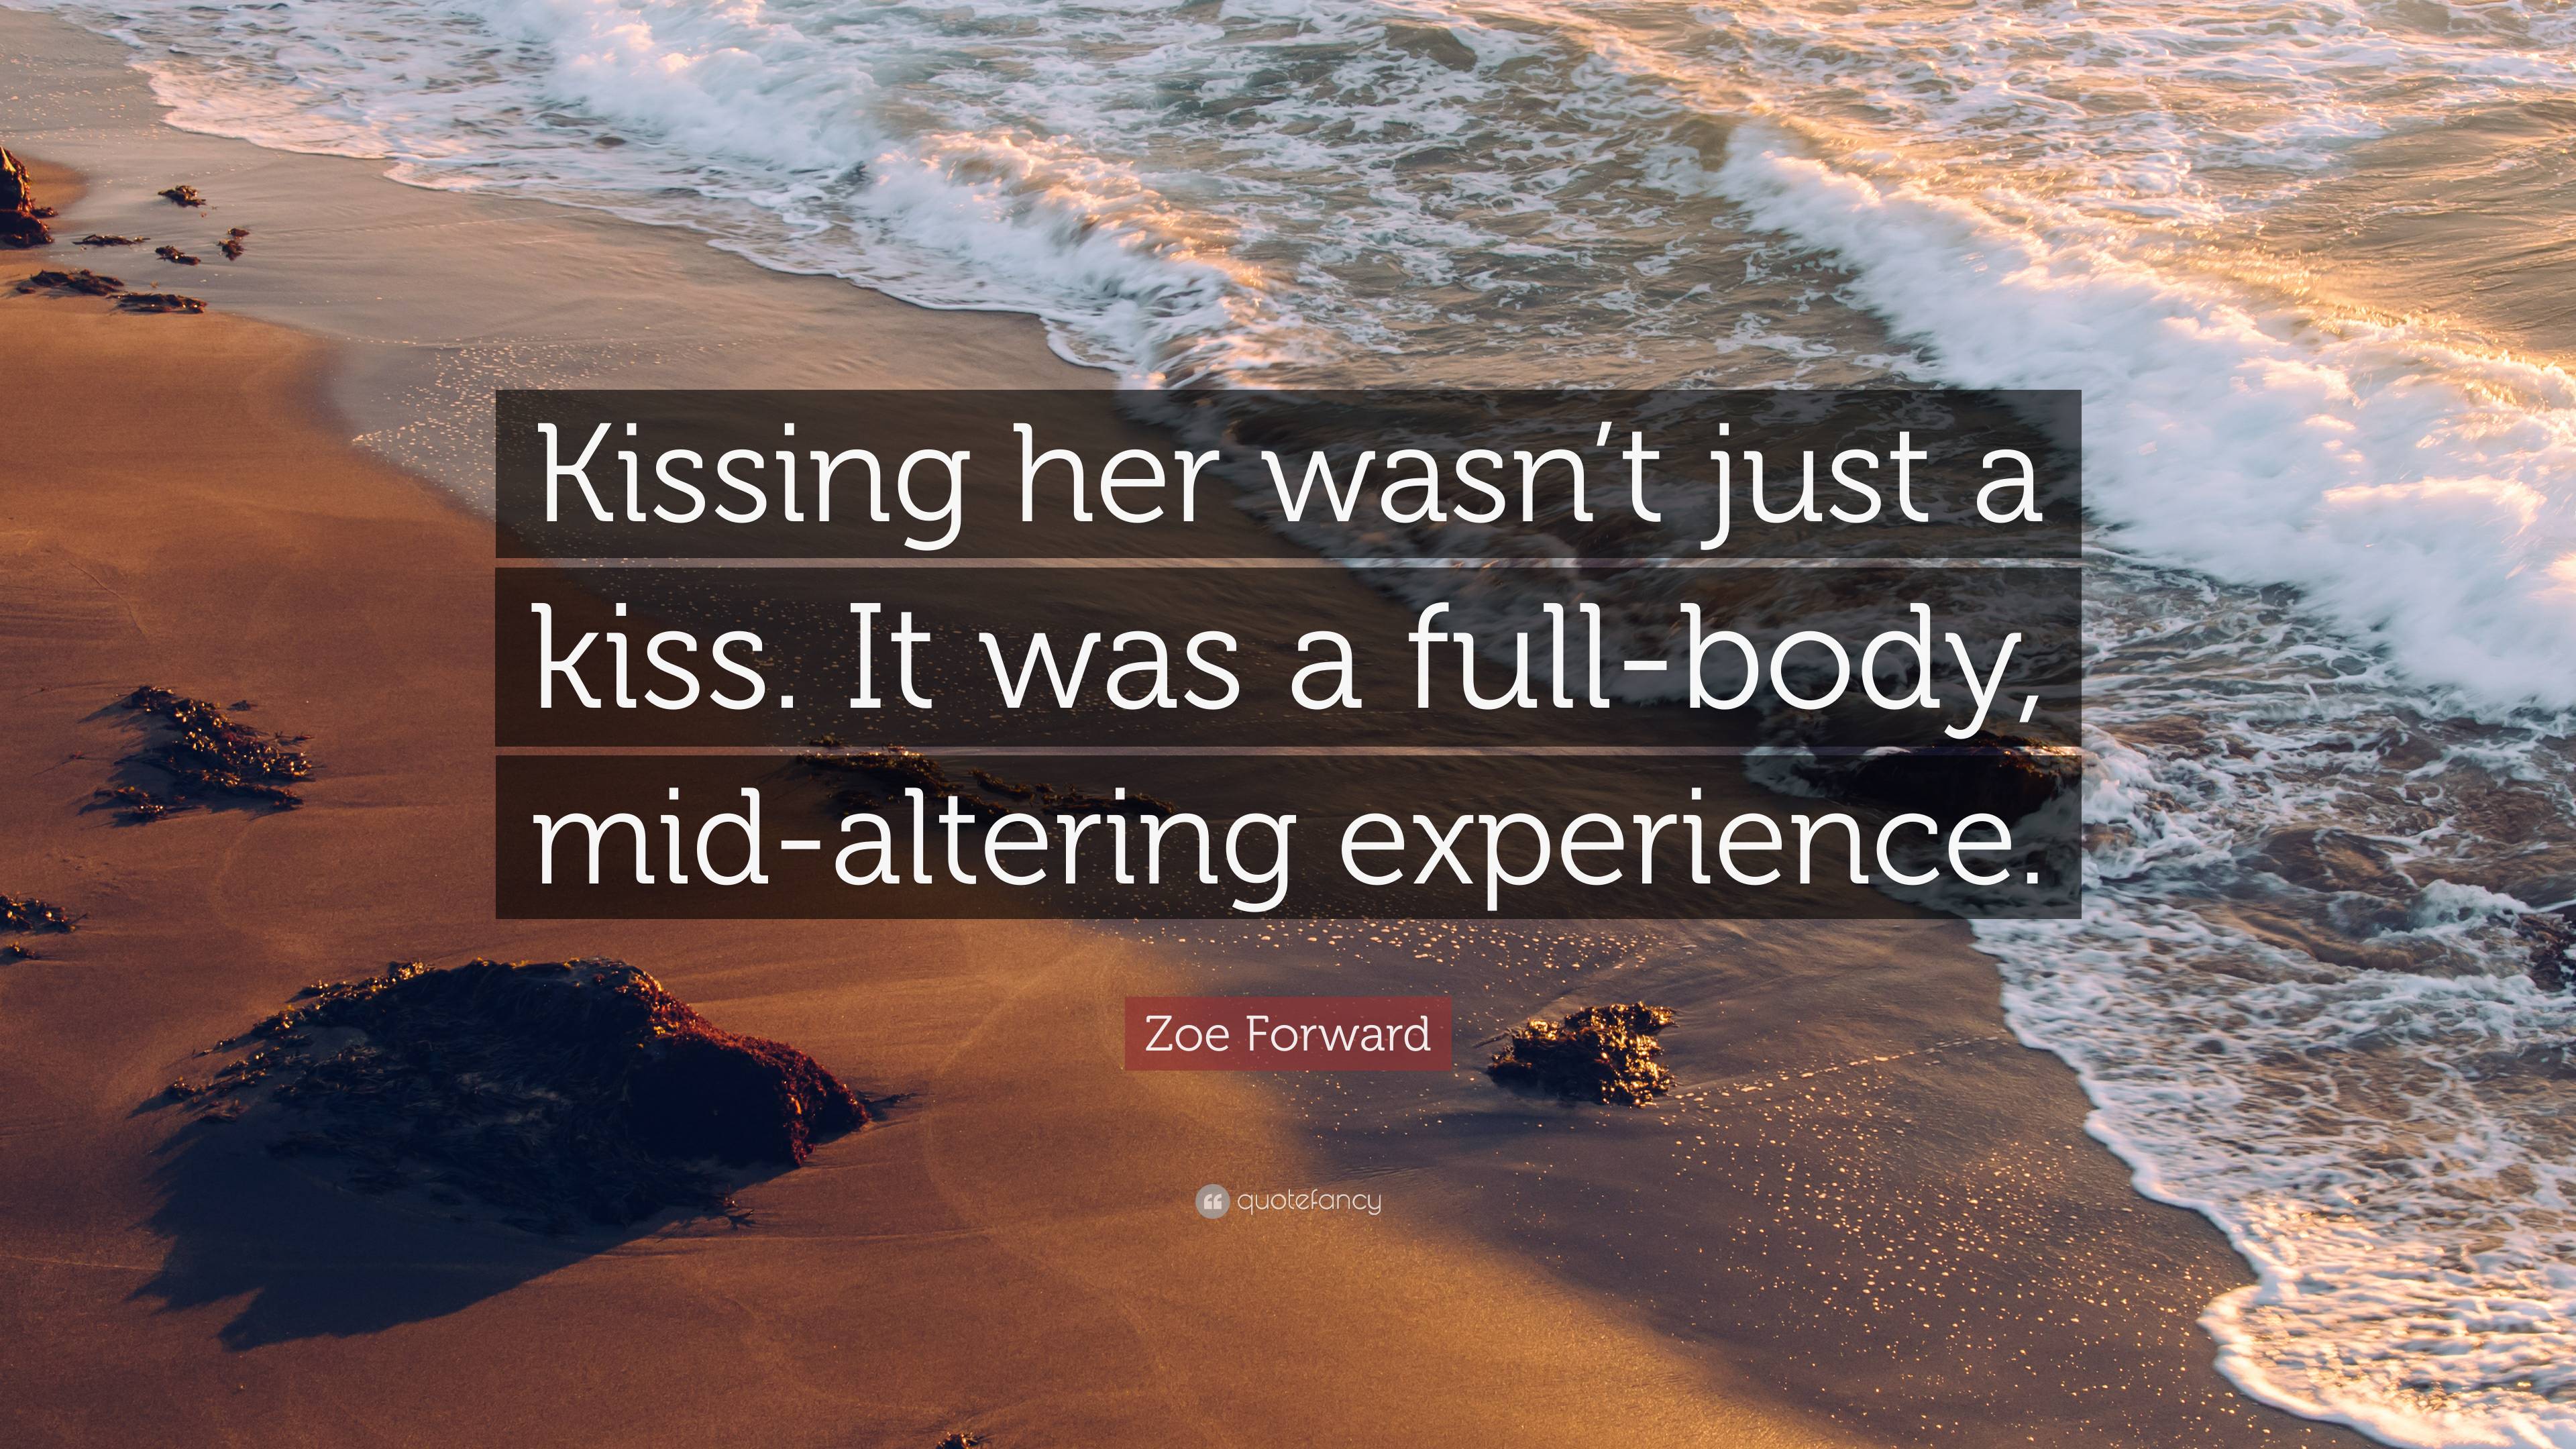 Zoe Forward Quote: “Kissing her wasn't just a kiss. It was a full